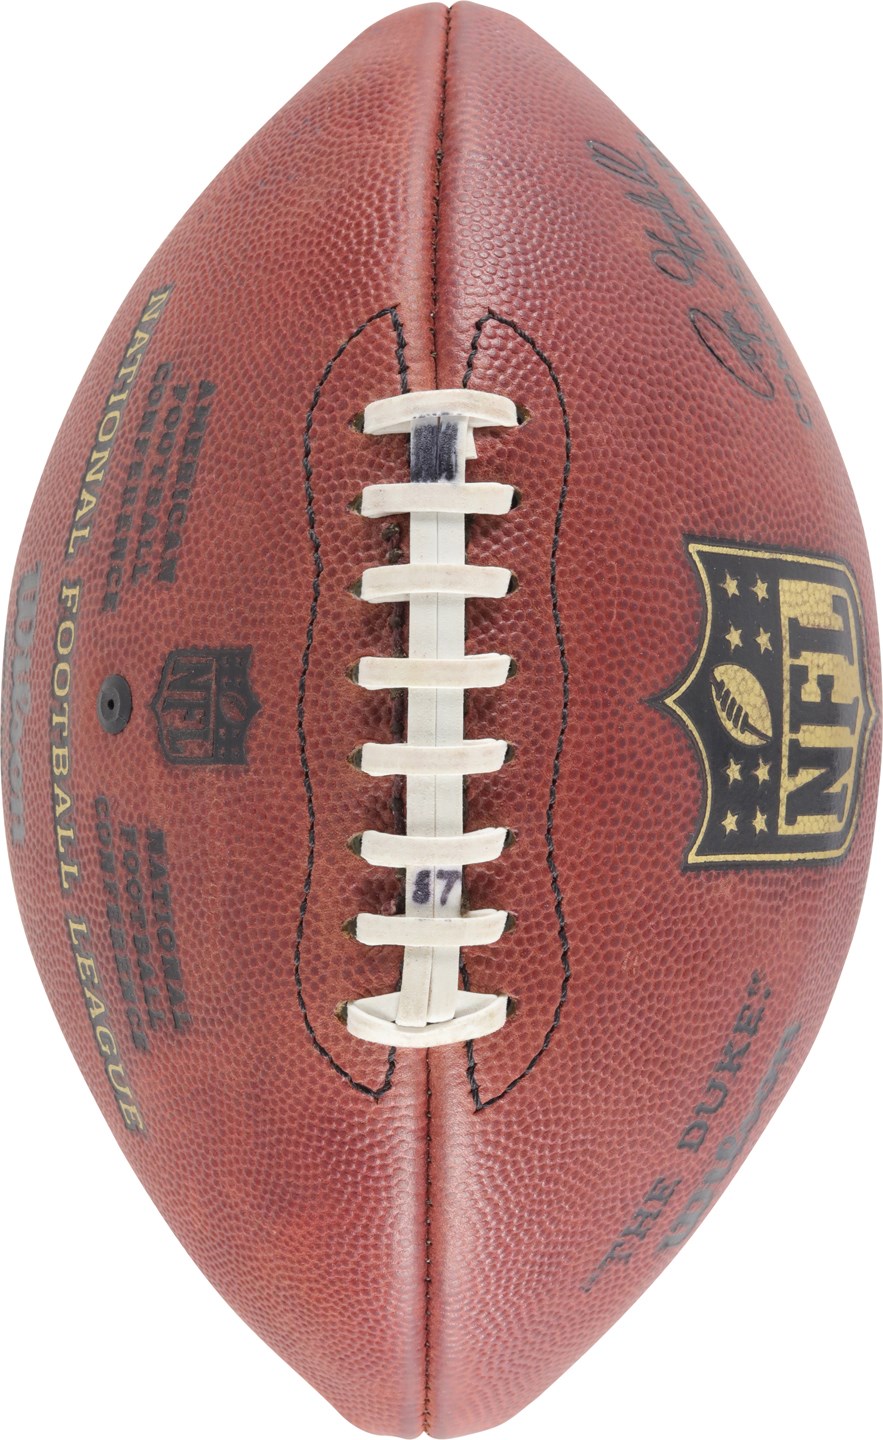 - Ron Gronkowski Game Used Football Given to Friend